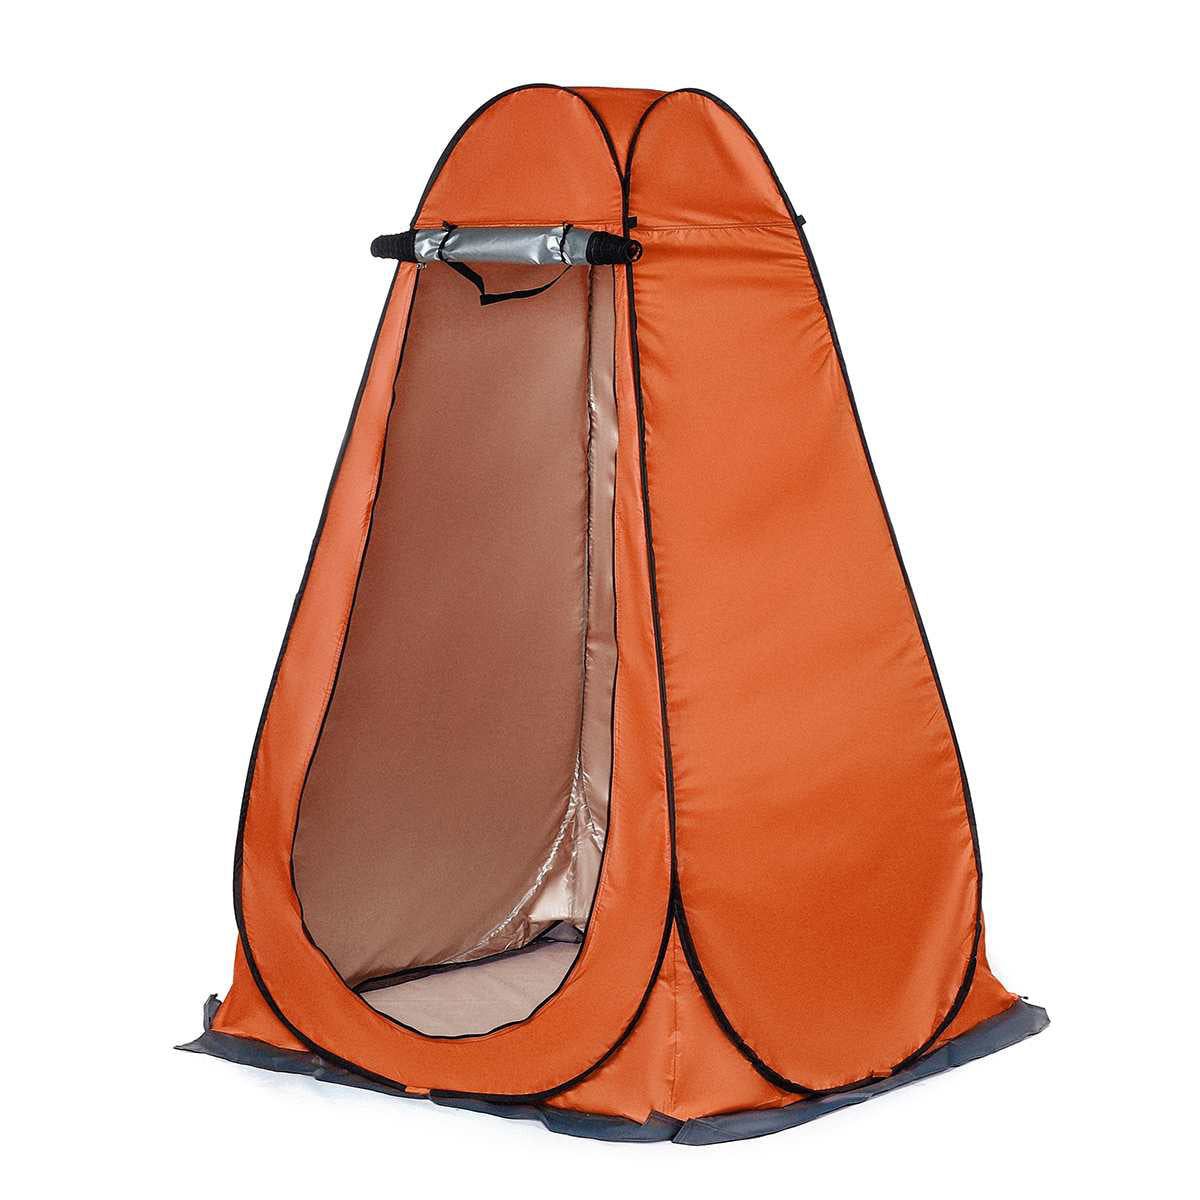 camping shower tent - best pop up privacy shower tent | portable shower tent